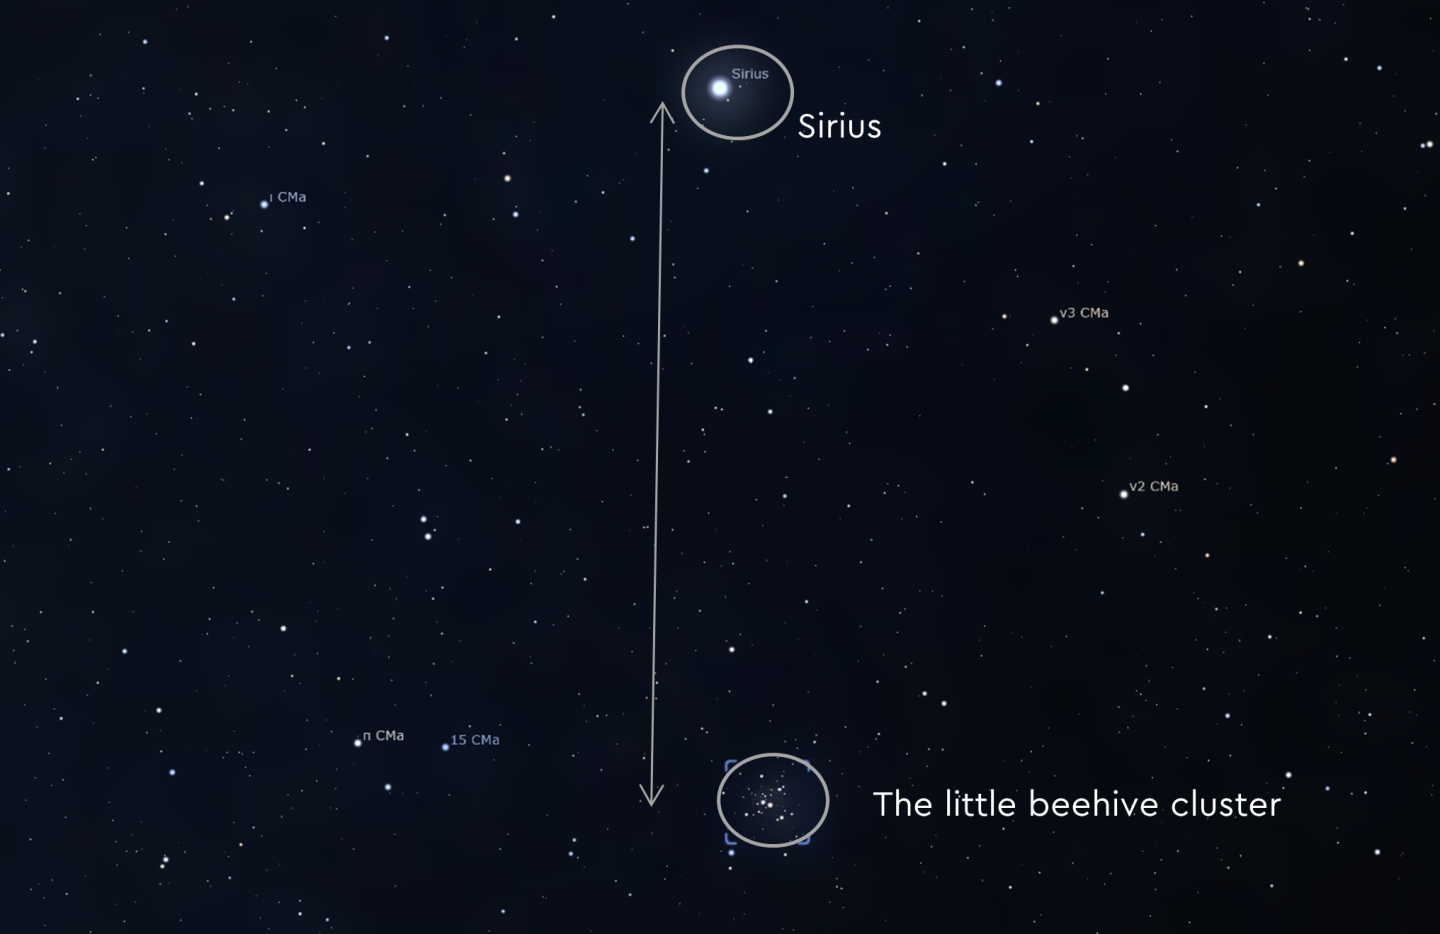 An image of Sirius and the little beehive cluster in the night sky 